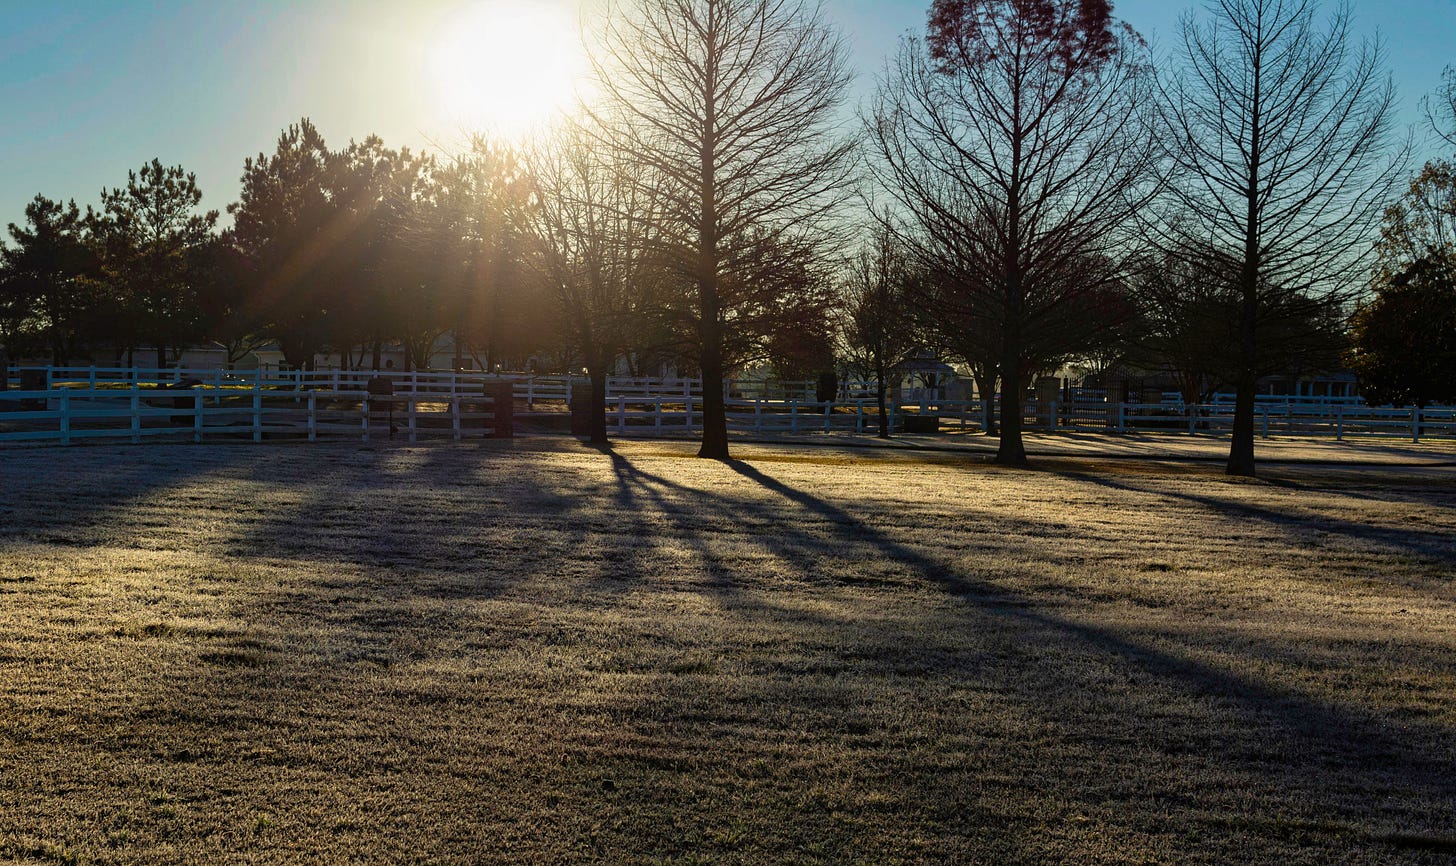 shadows of the trees and white fences across the lawn with the sun rising behind the trees